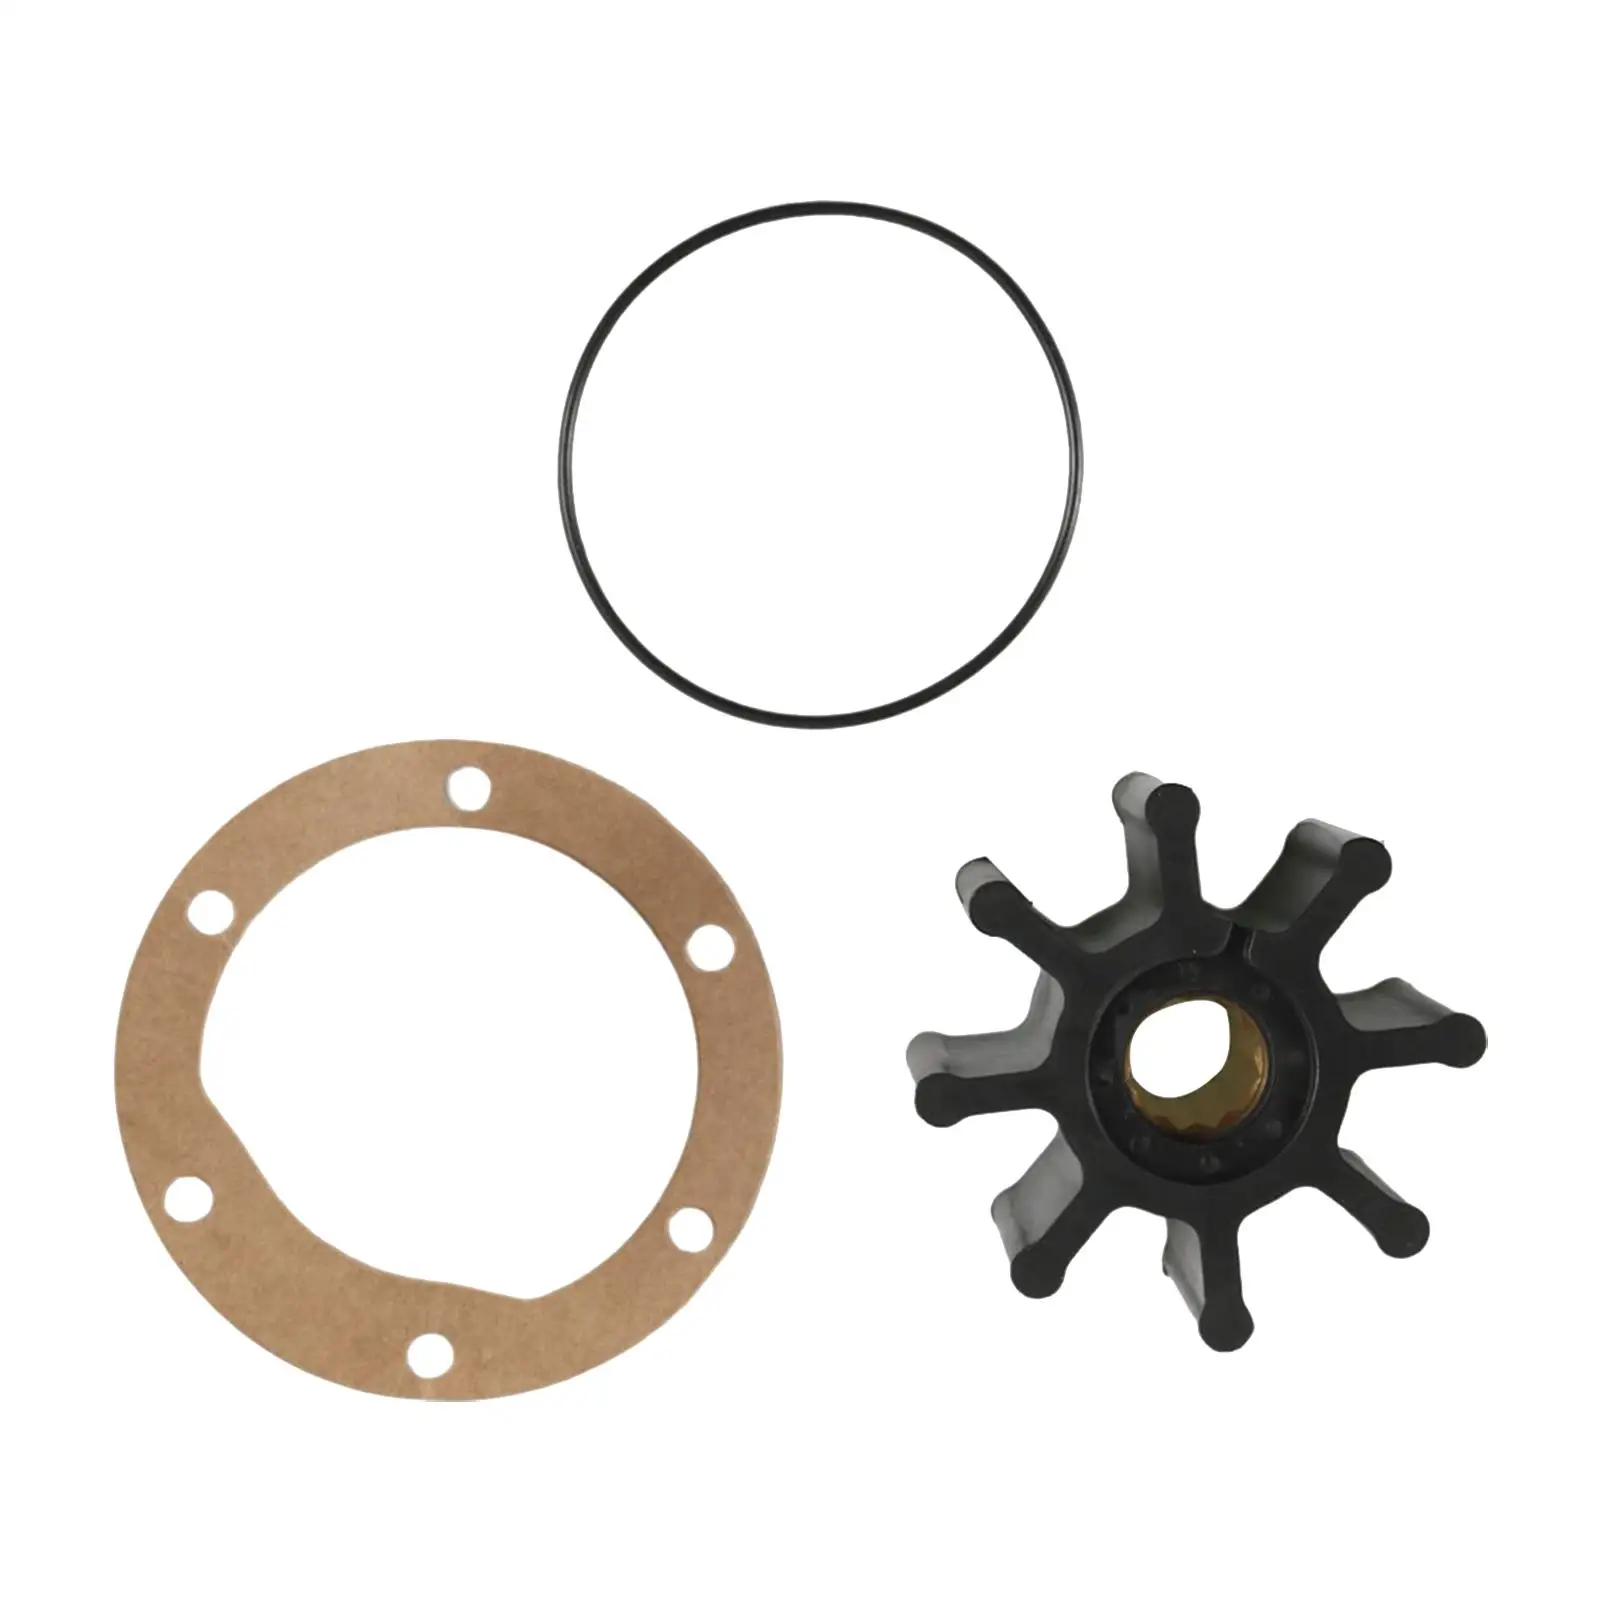 875593-6 877061 3841697 21951356 Spare Parts Easy to Install Repair Parts Replaces Water Pump Impeller Kit for